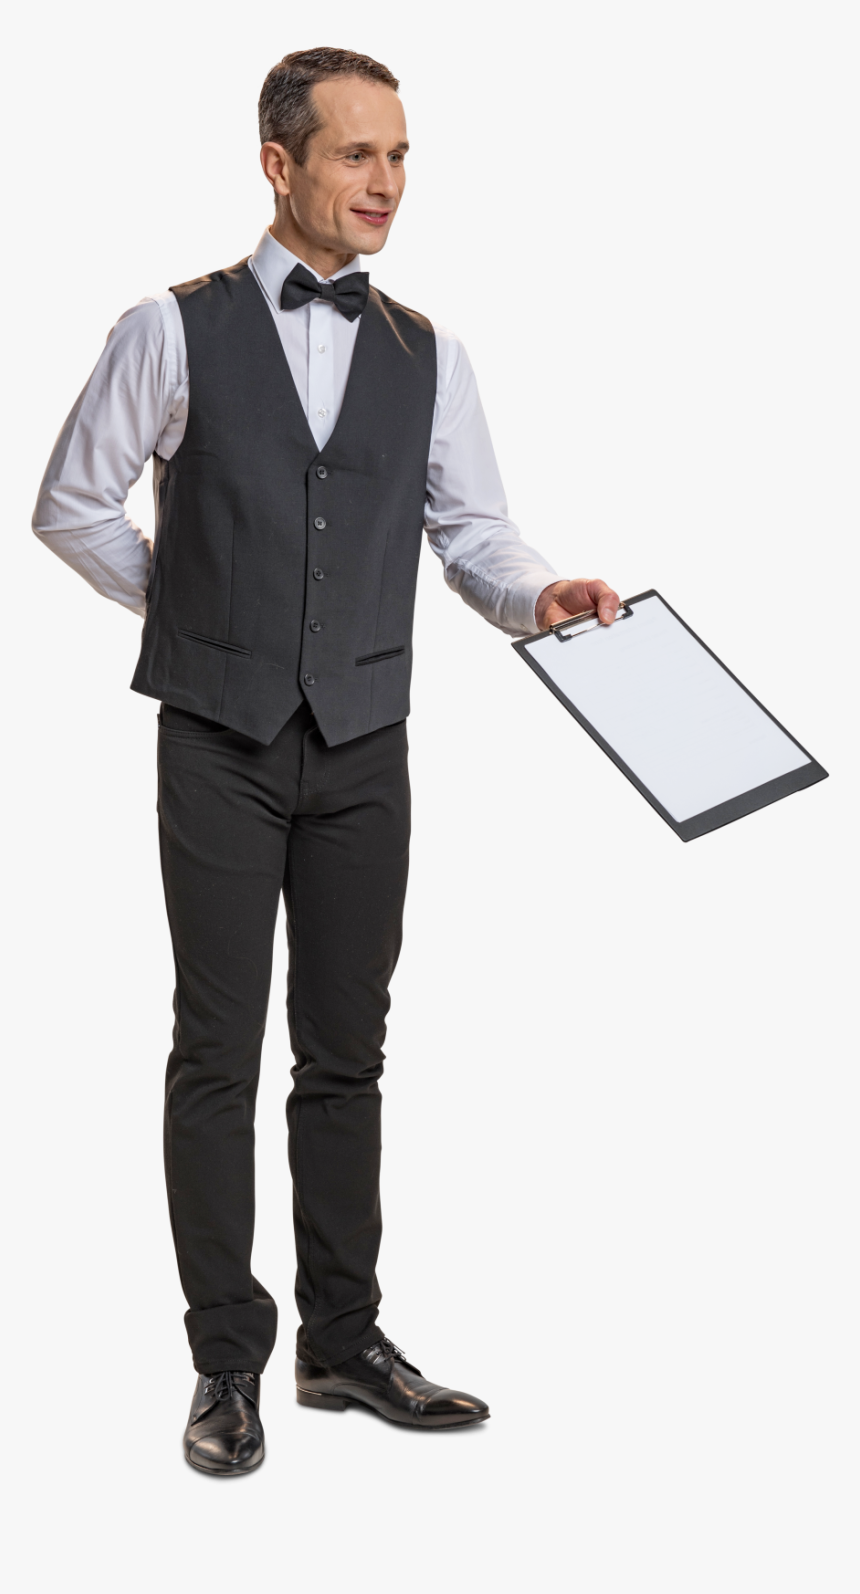 Cut Out Man Waiter - Transparent Waiter Png, Png Download, Free Download